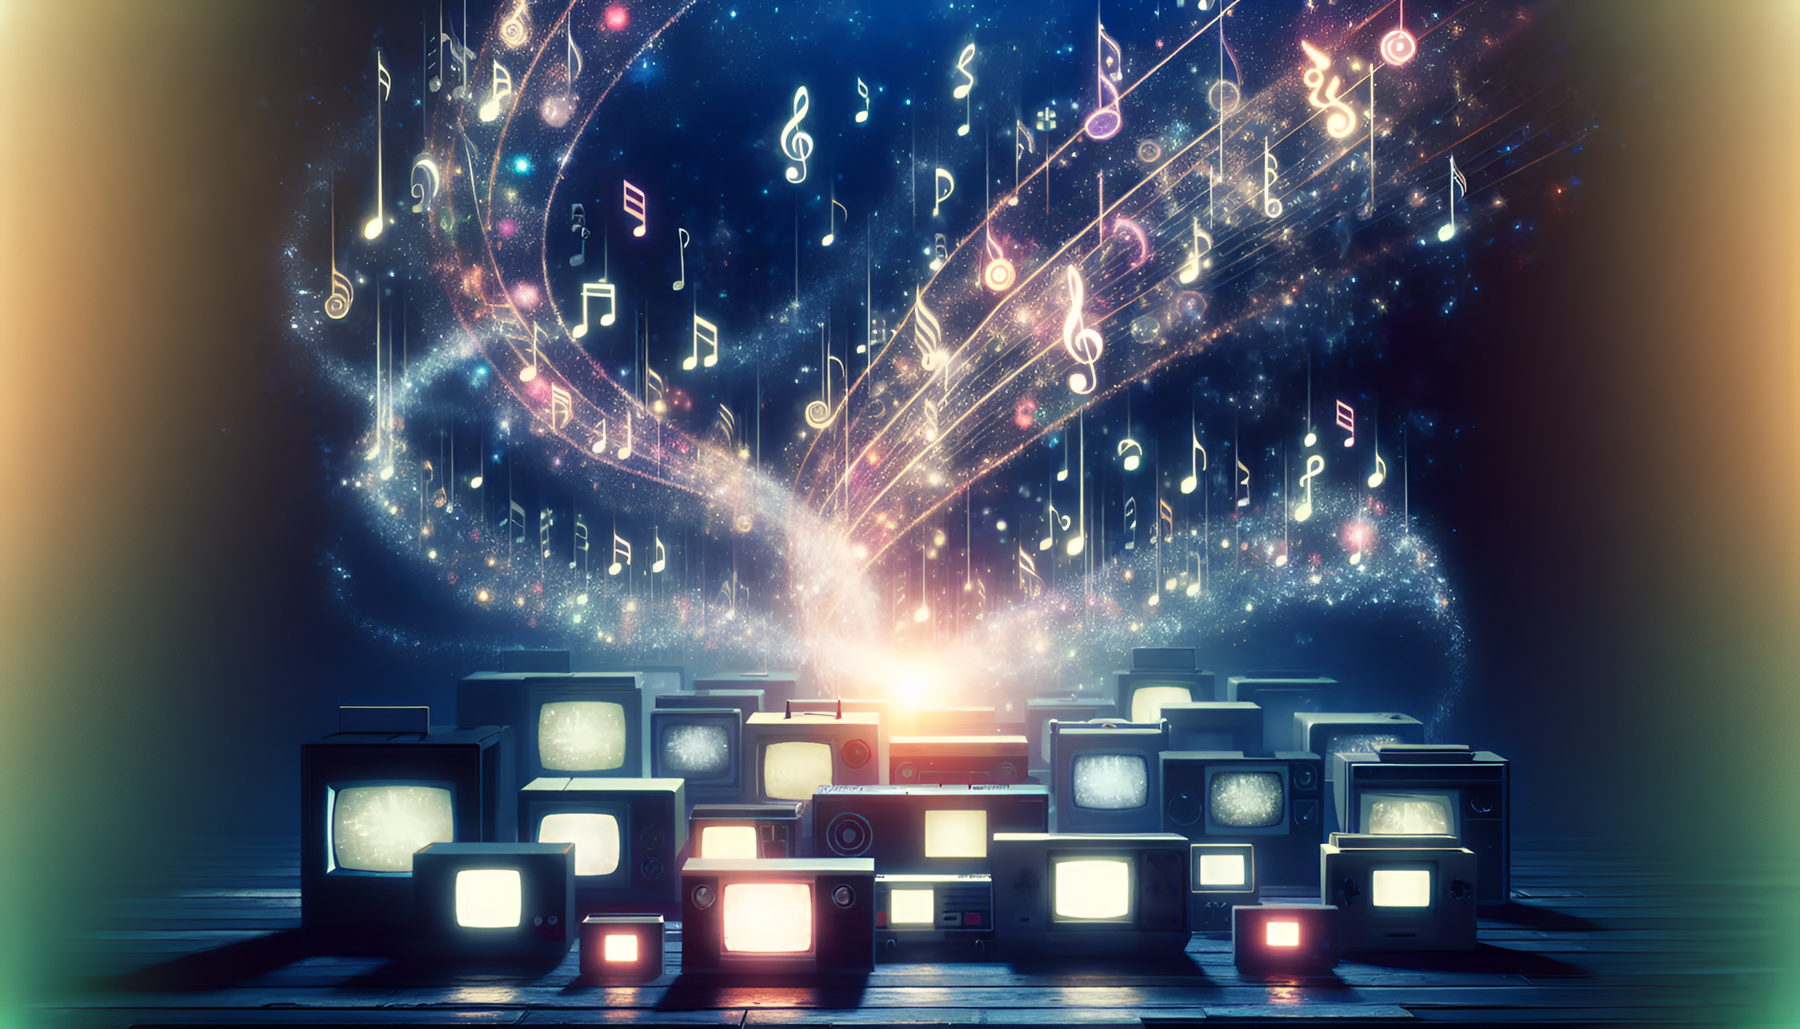 The image features an atmospheric array of vintage game consoles, with an ethereal cascade of musical notes and symbols flowing from their screens, encapsulating the magic of iconic video game soundtracks.